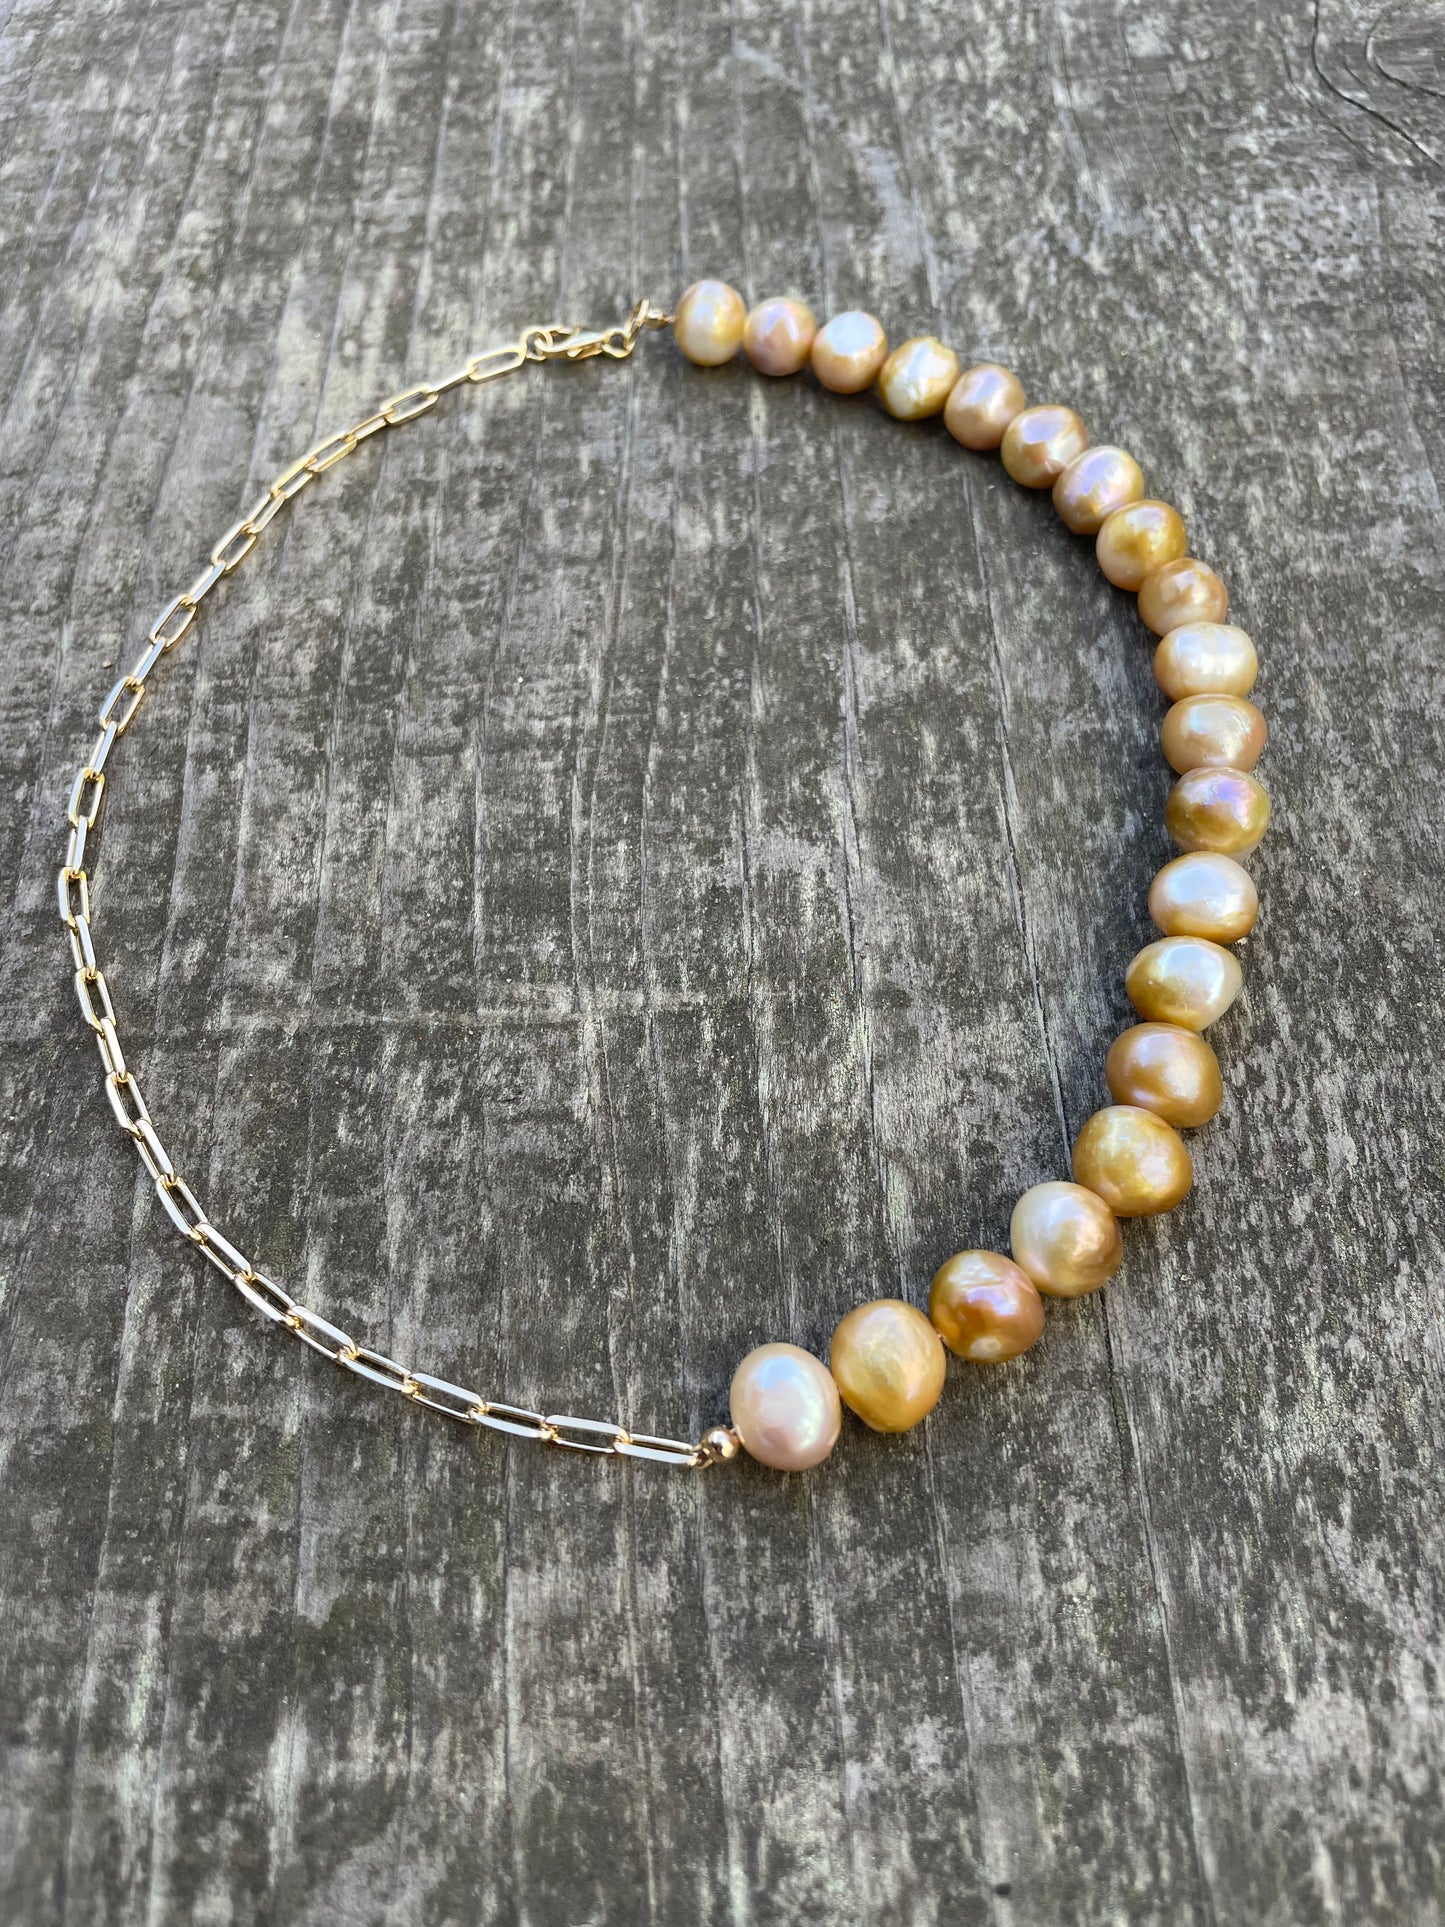 A choker necklace with half gold chain and half golden pearls on a wooden background